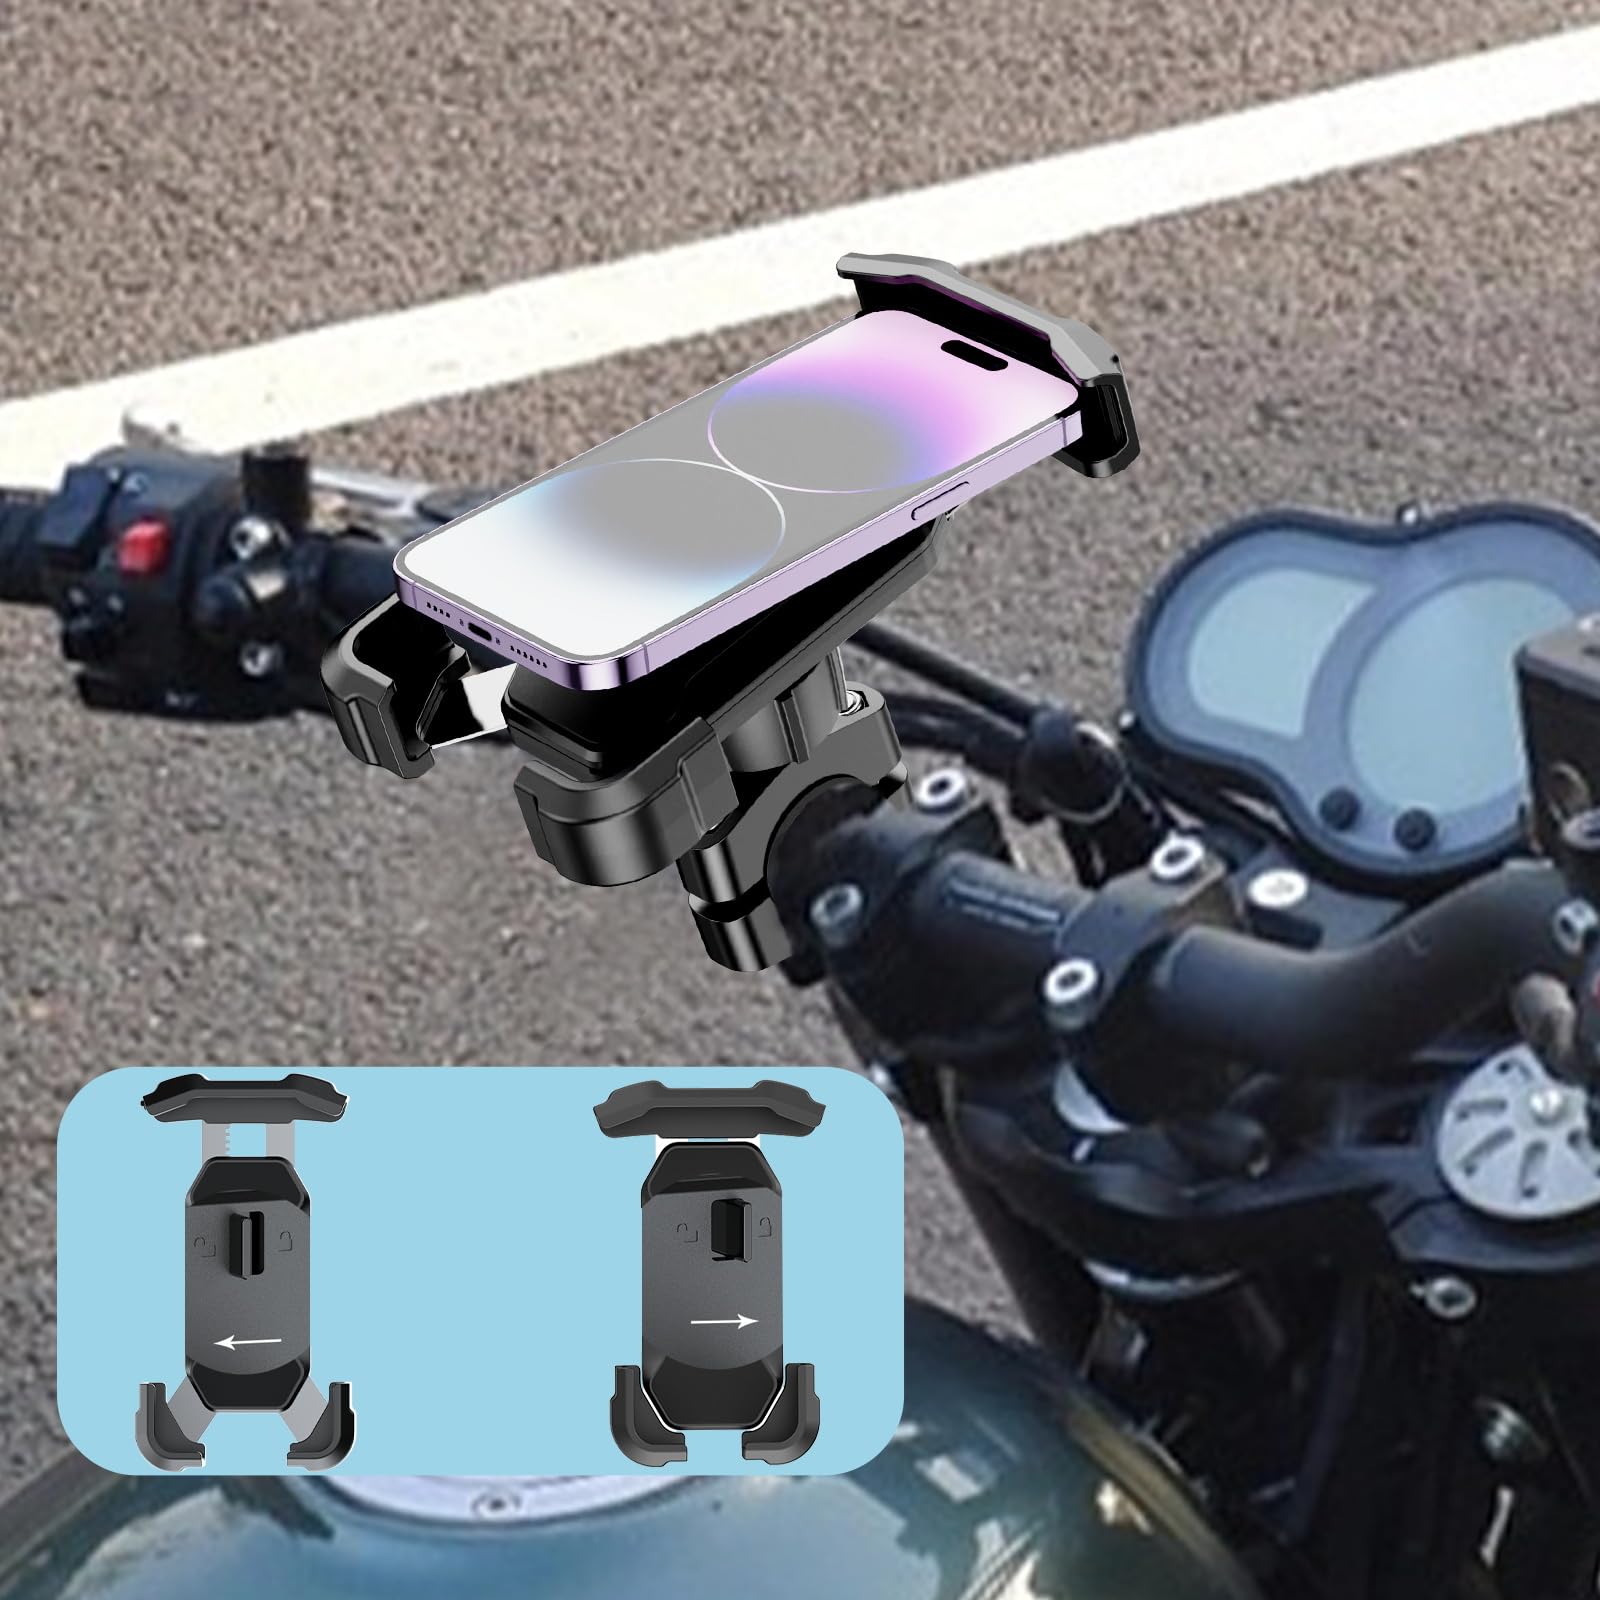 SUNDAREE Motorcycle Phone holder with Aluminum Mirror Mount HolderClamp, 360° Rotating Motorcycle Phone Holder for iPhone 15 Pro Max/Plus, 14 ProMax, and More 4.7" to 6.8"Smartphones